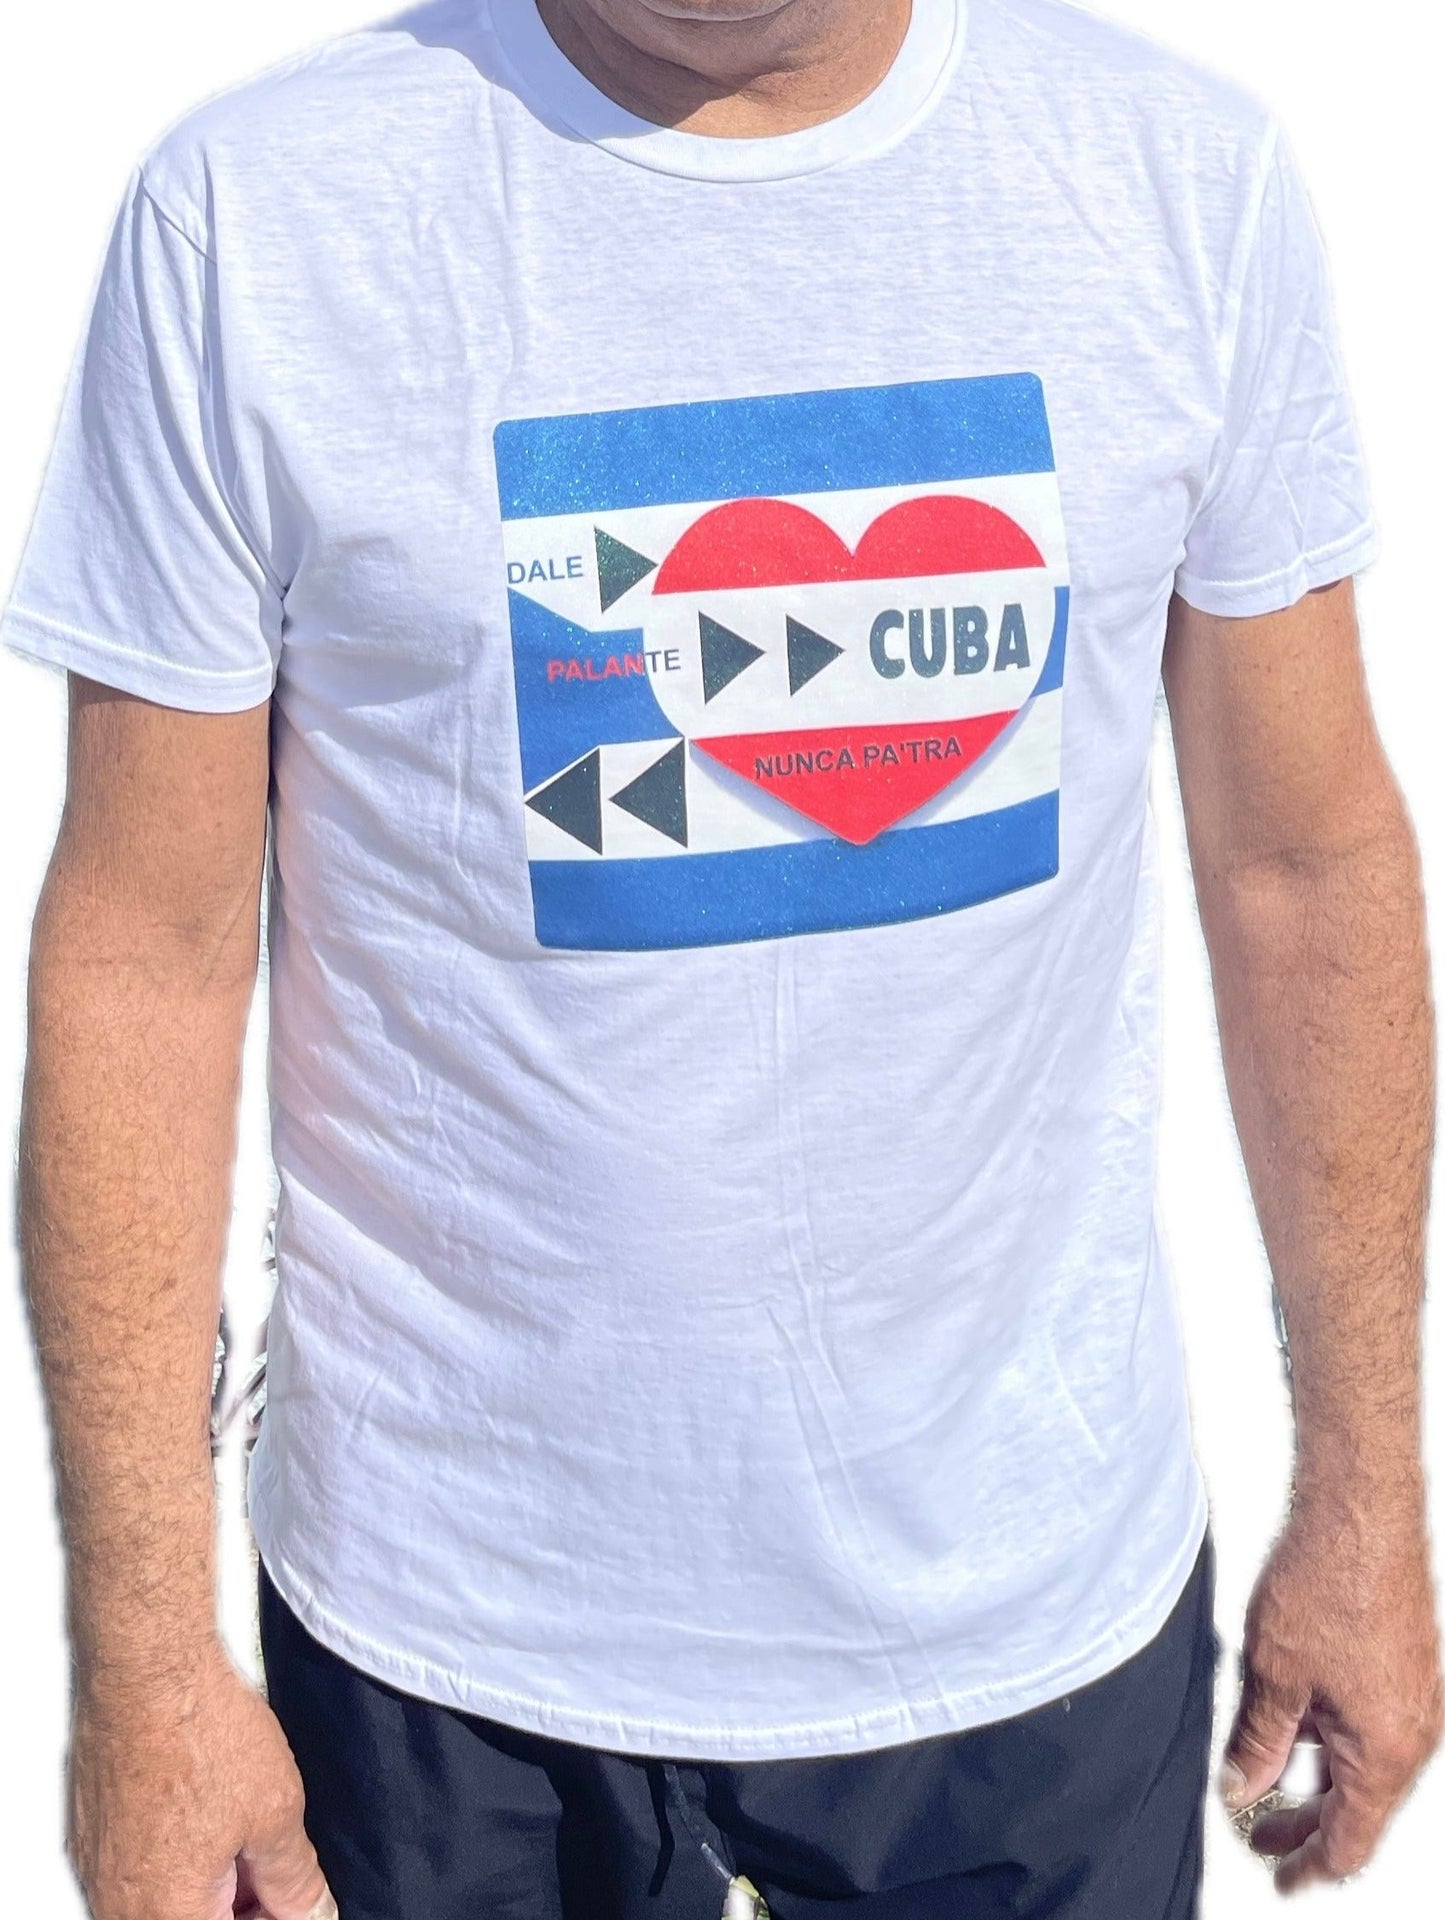 White T-shirt With "Dale Palante" and Cuba Heart